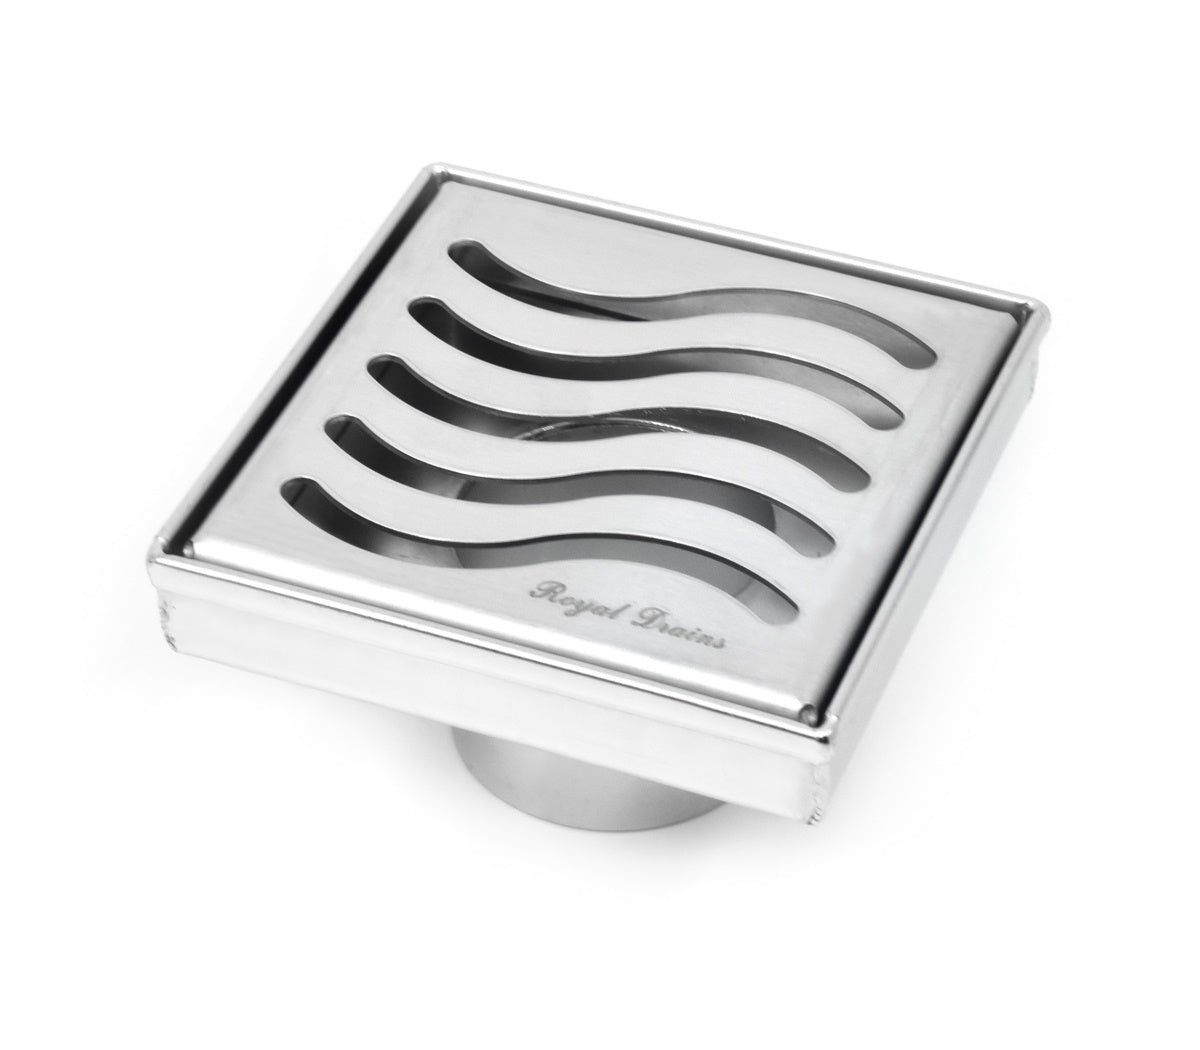 SereneDrains 4 inch Square Shower Drain Ocean Wave Design Polished Chrome